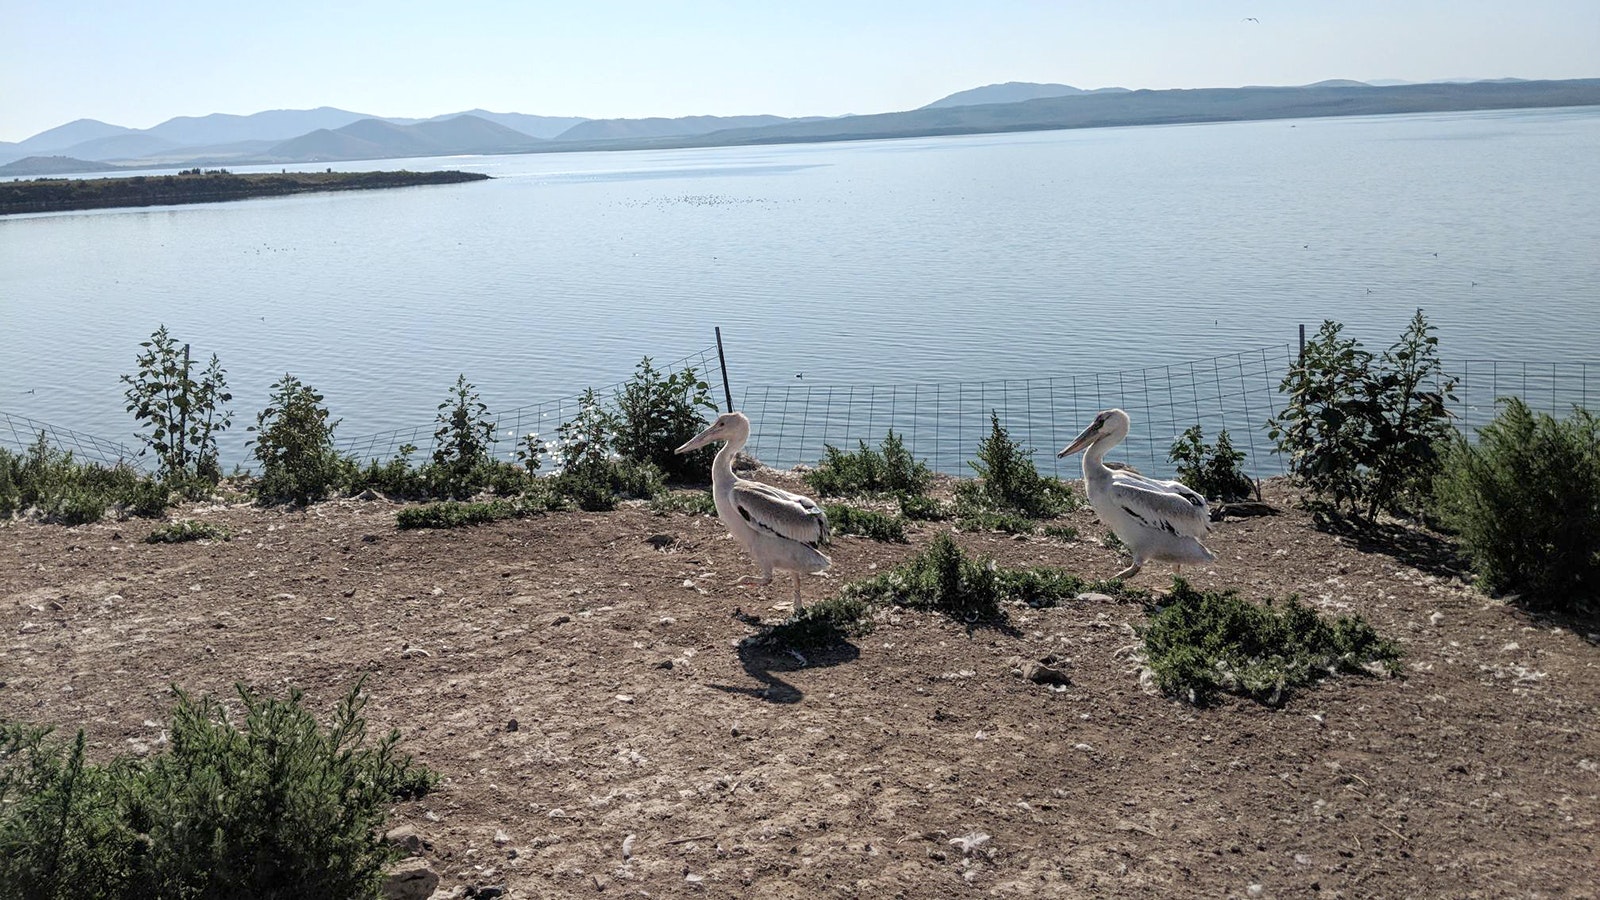 Colonies of pelicans nest on islands in Blackfoot Reservoir in Idaho, not far from the Wyoming state line. The birds have been gobbling prize Yellowstone cutthroat trout form the reservoir and adjoining river system.